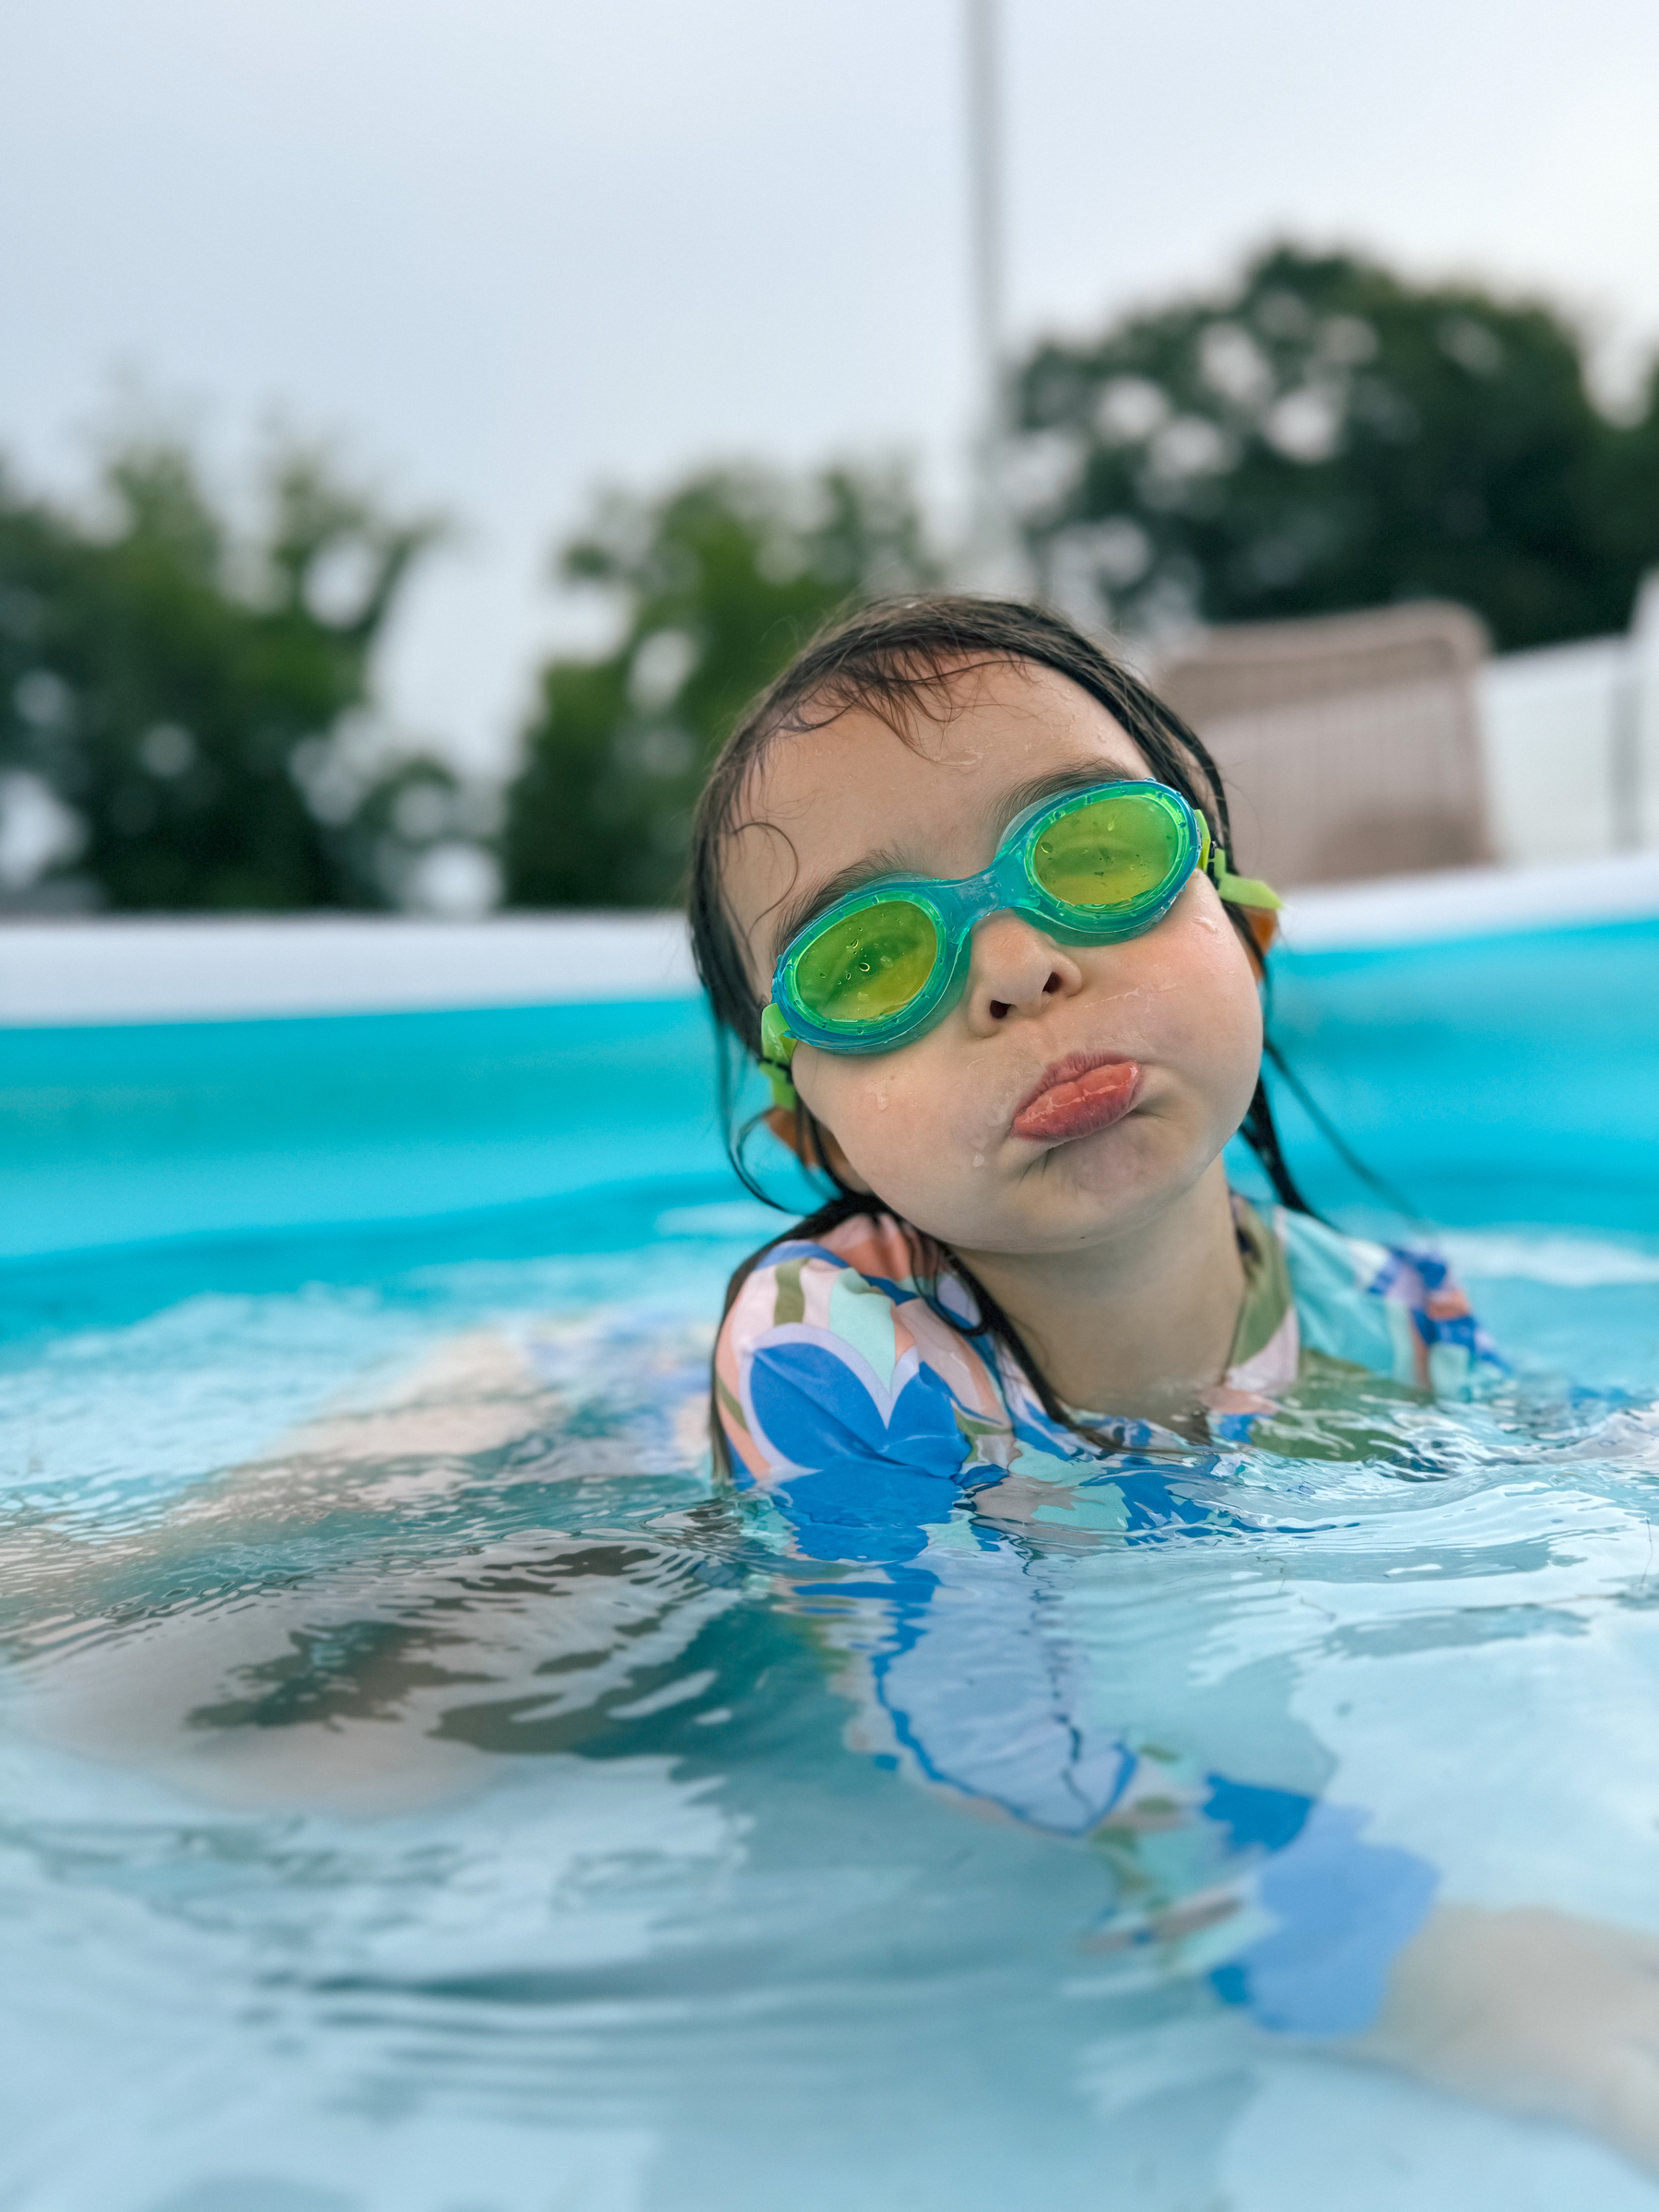 A girl in swimming goggles